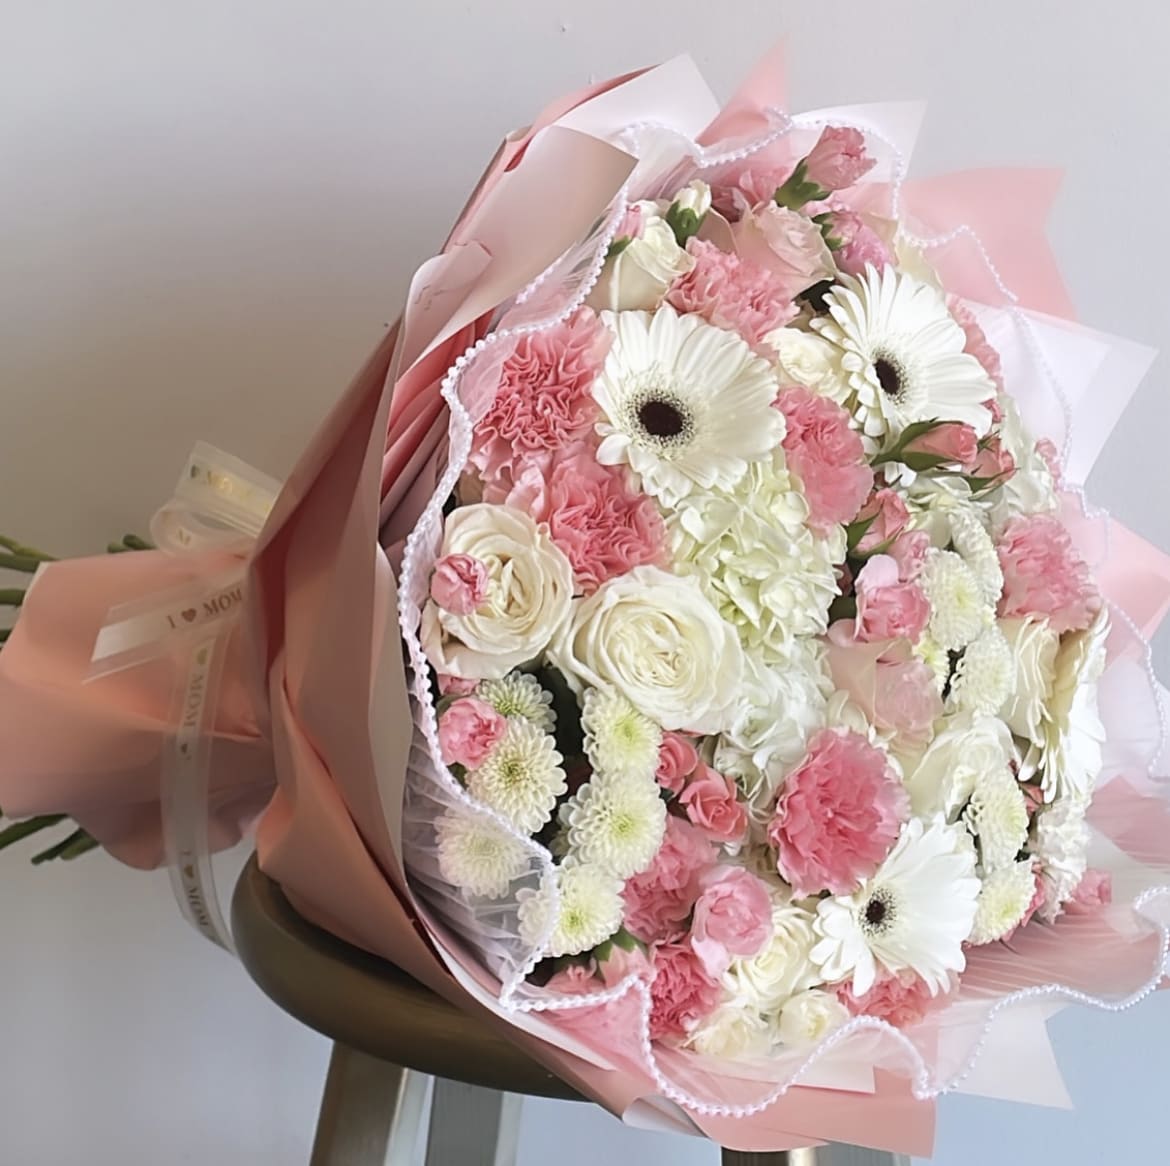 Pink and White PREMIUM bouquet - mixed pink and white blooms